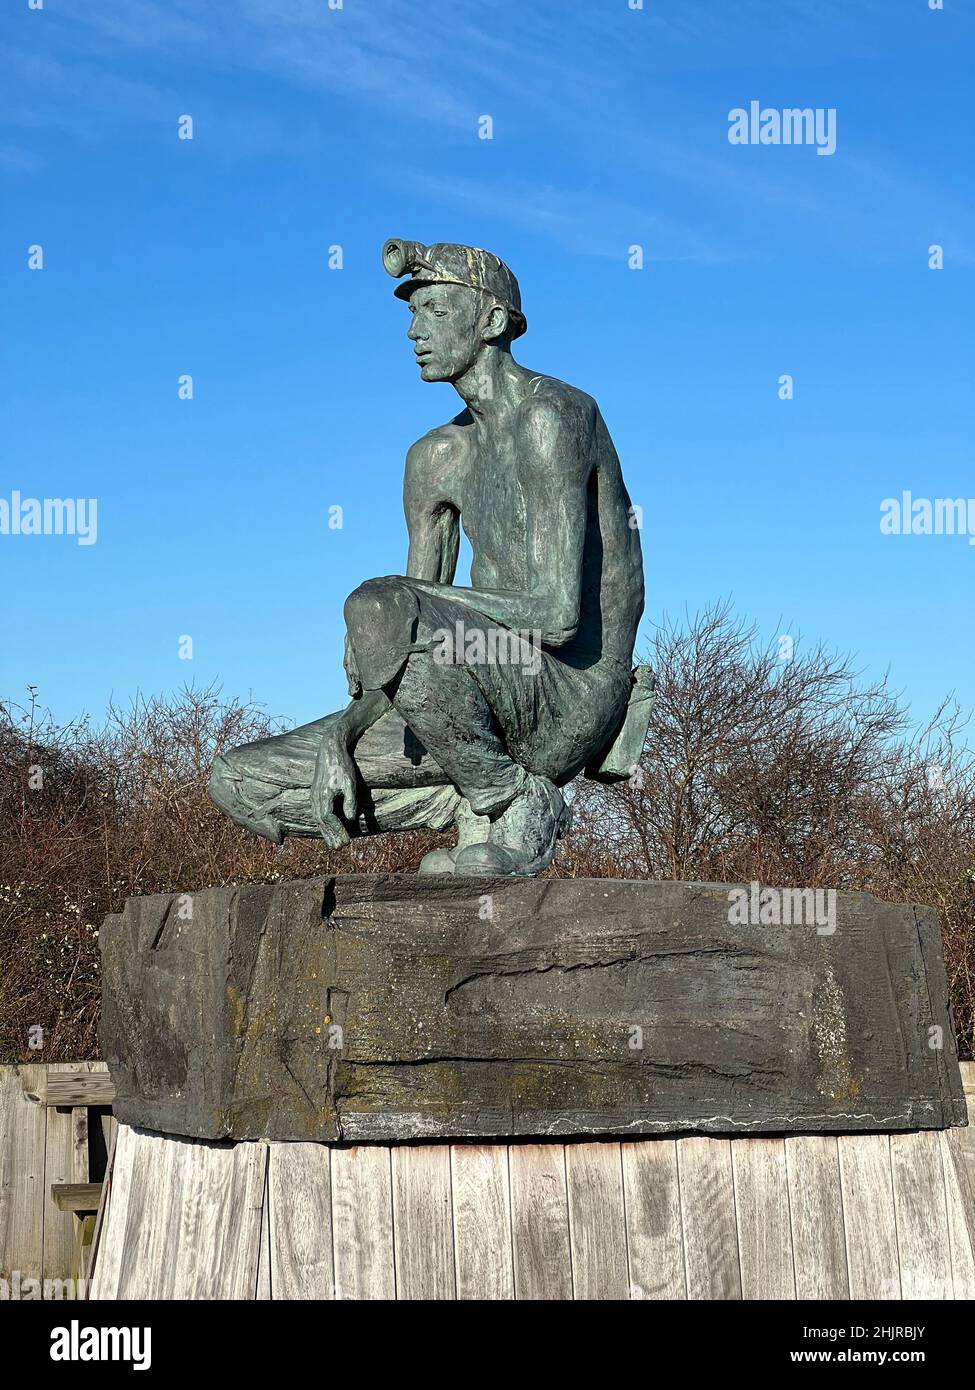 The Waiting Miner statue was relocated to Fowlmead Country Park, the former site of Betteshanger Colliery, in Kent, UK Stock Photo